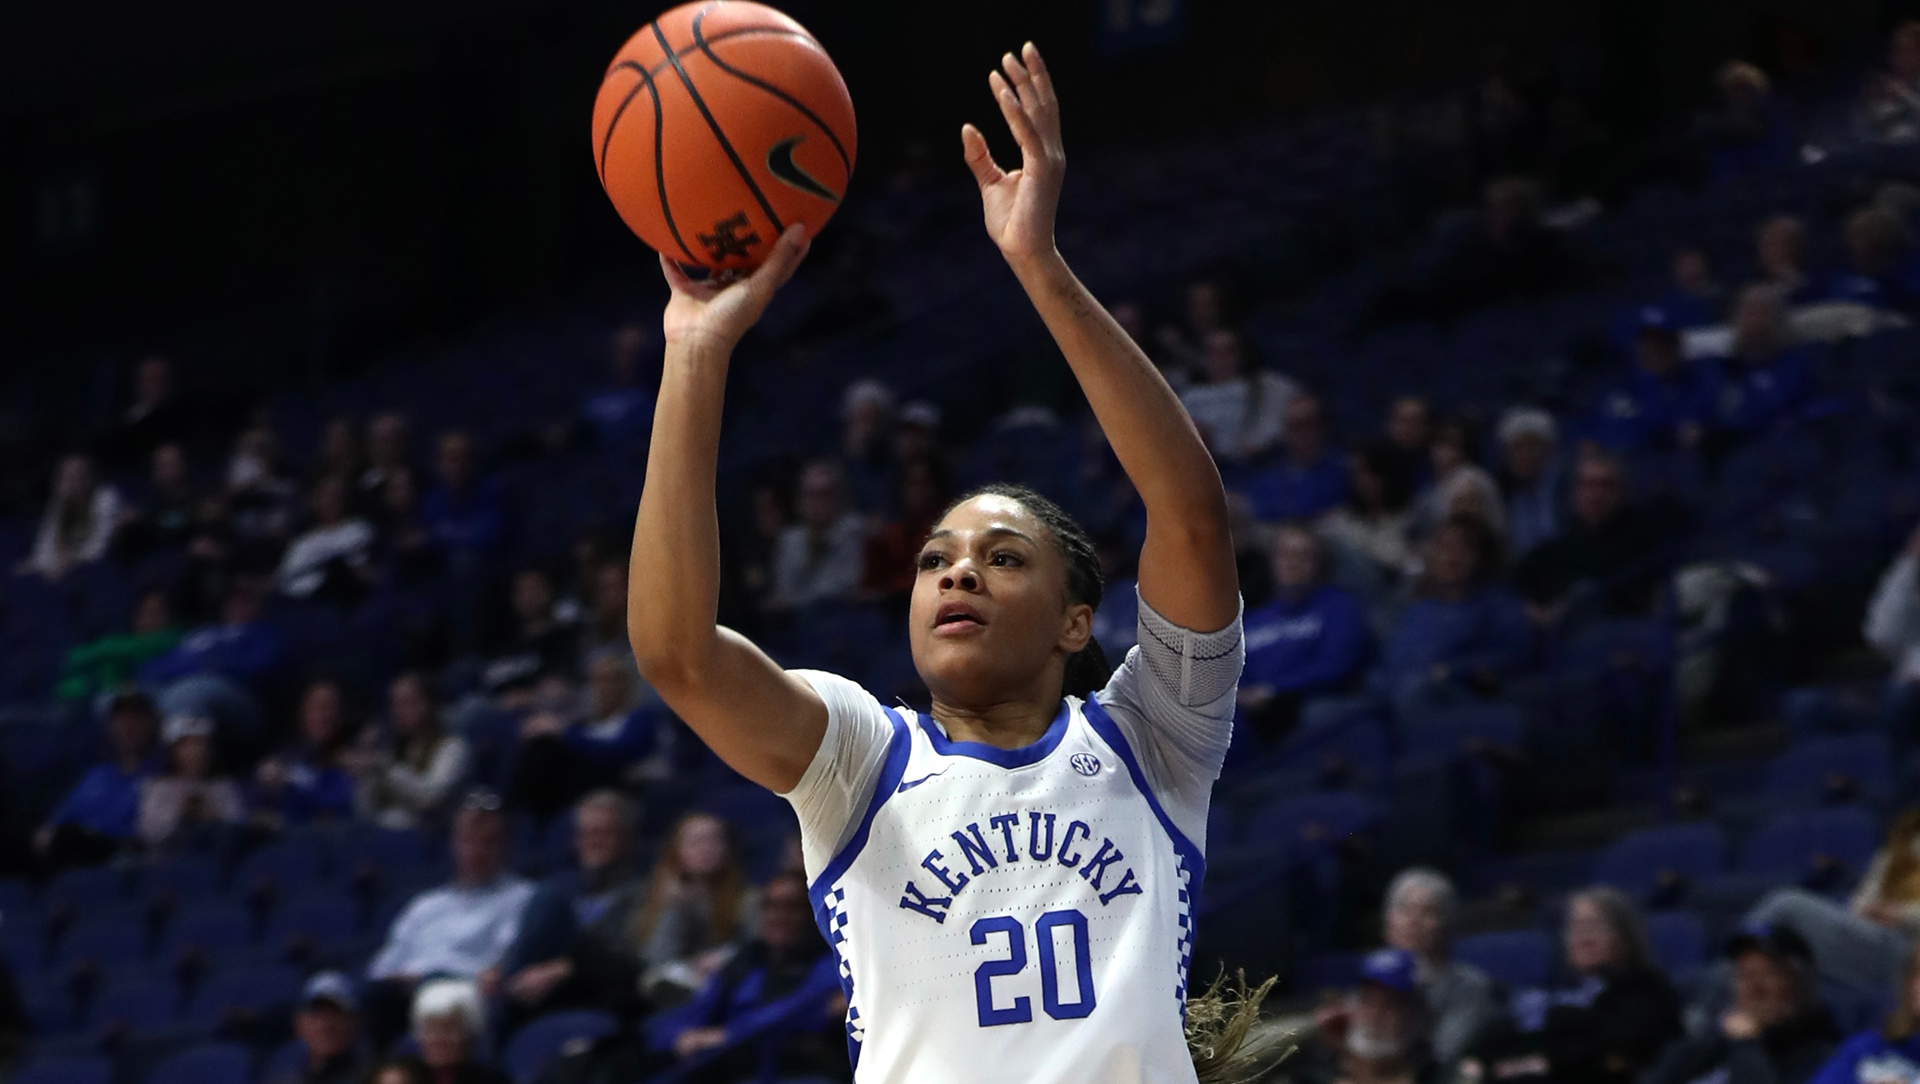 Kentucky Drops Home Contest to Ole Miss on Thursday